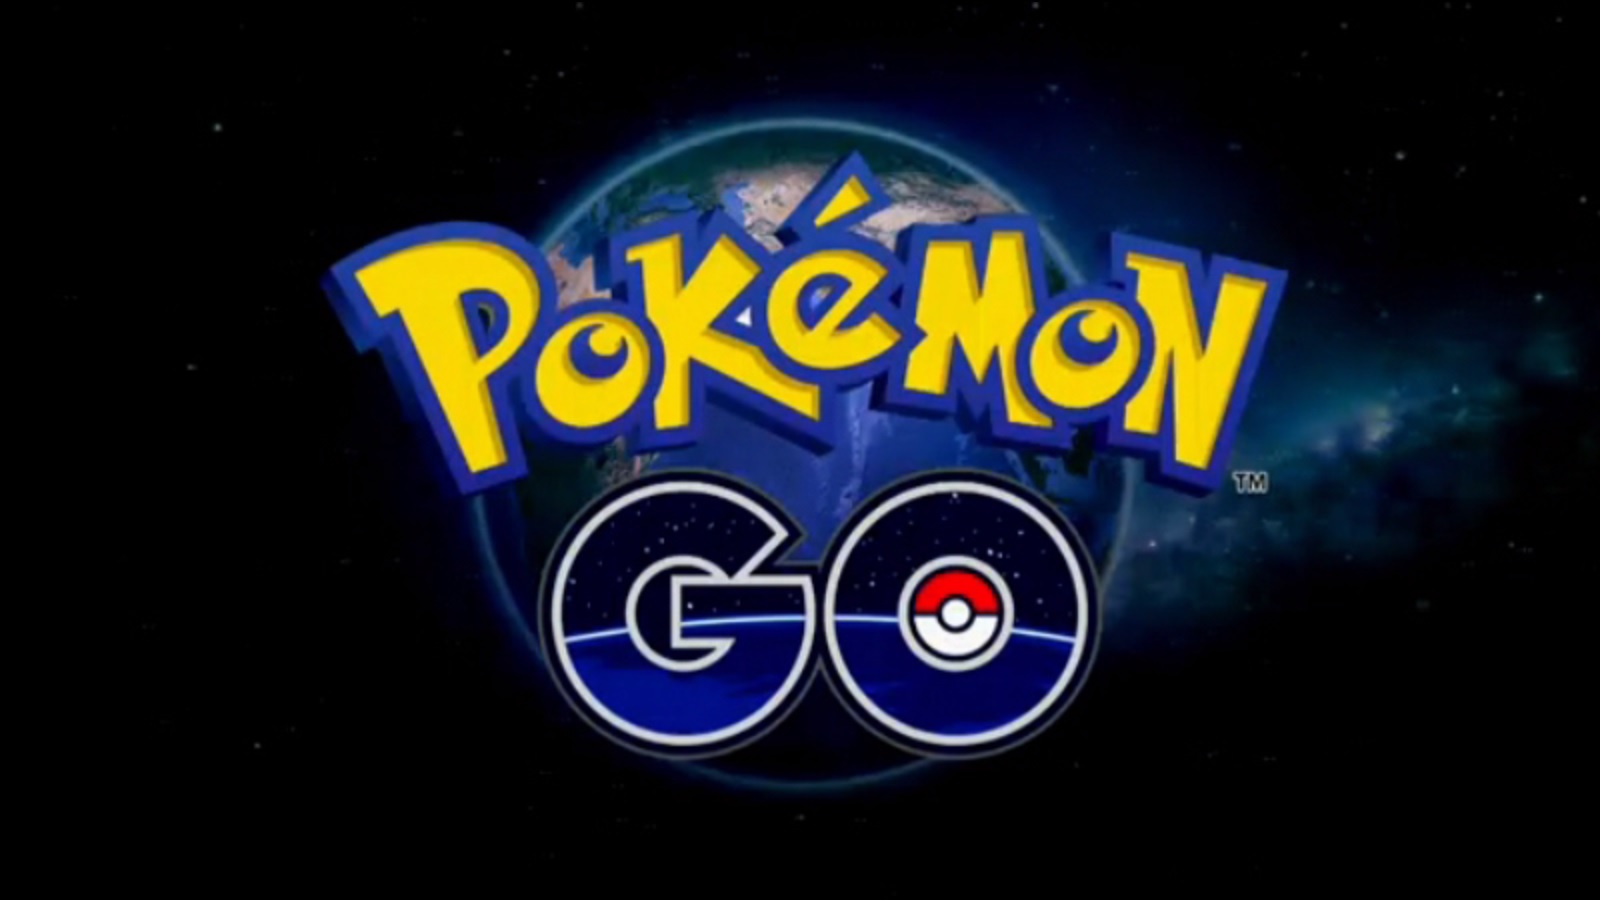 “Pokemon Go” Gen 2 Finally Coming - No Release Date Yet, but Code Exists to Introduce the New Pokemon